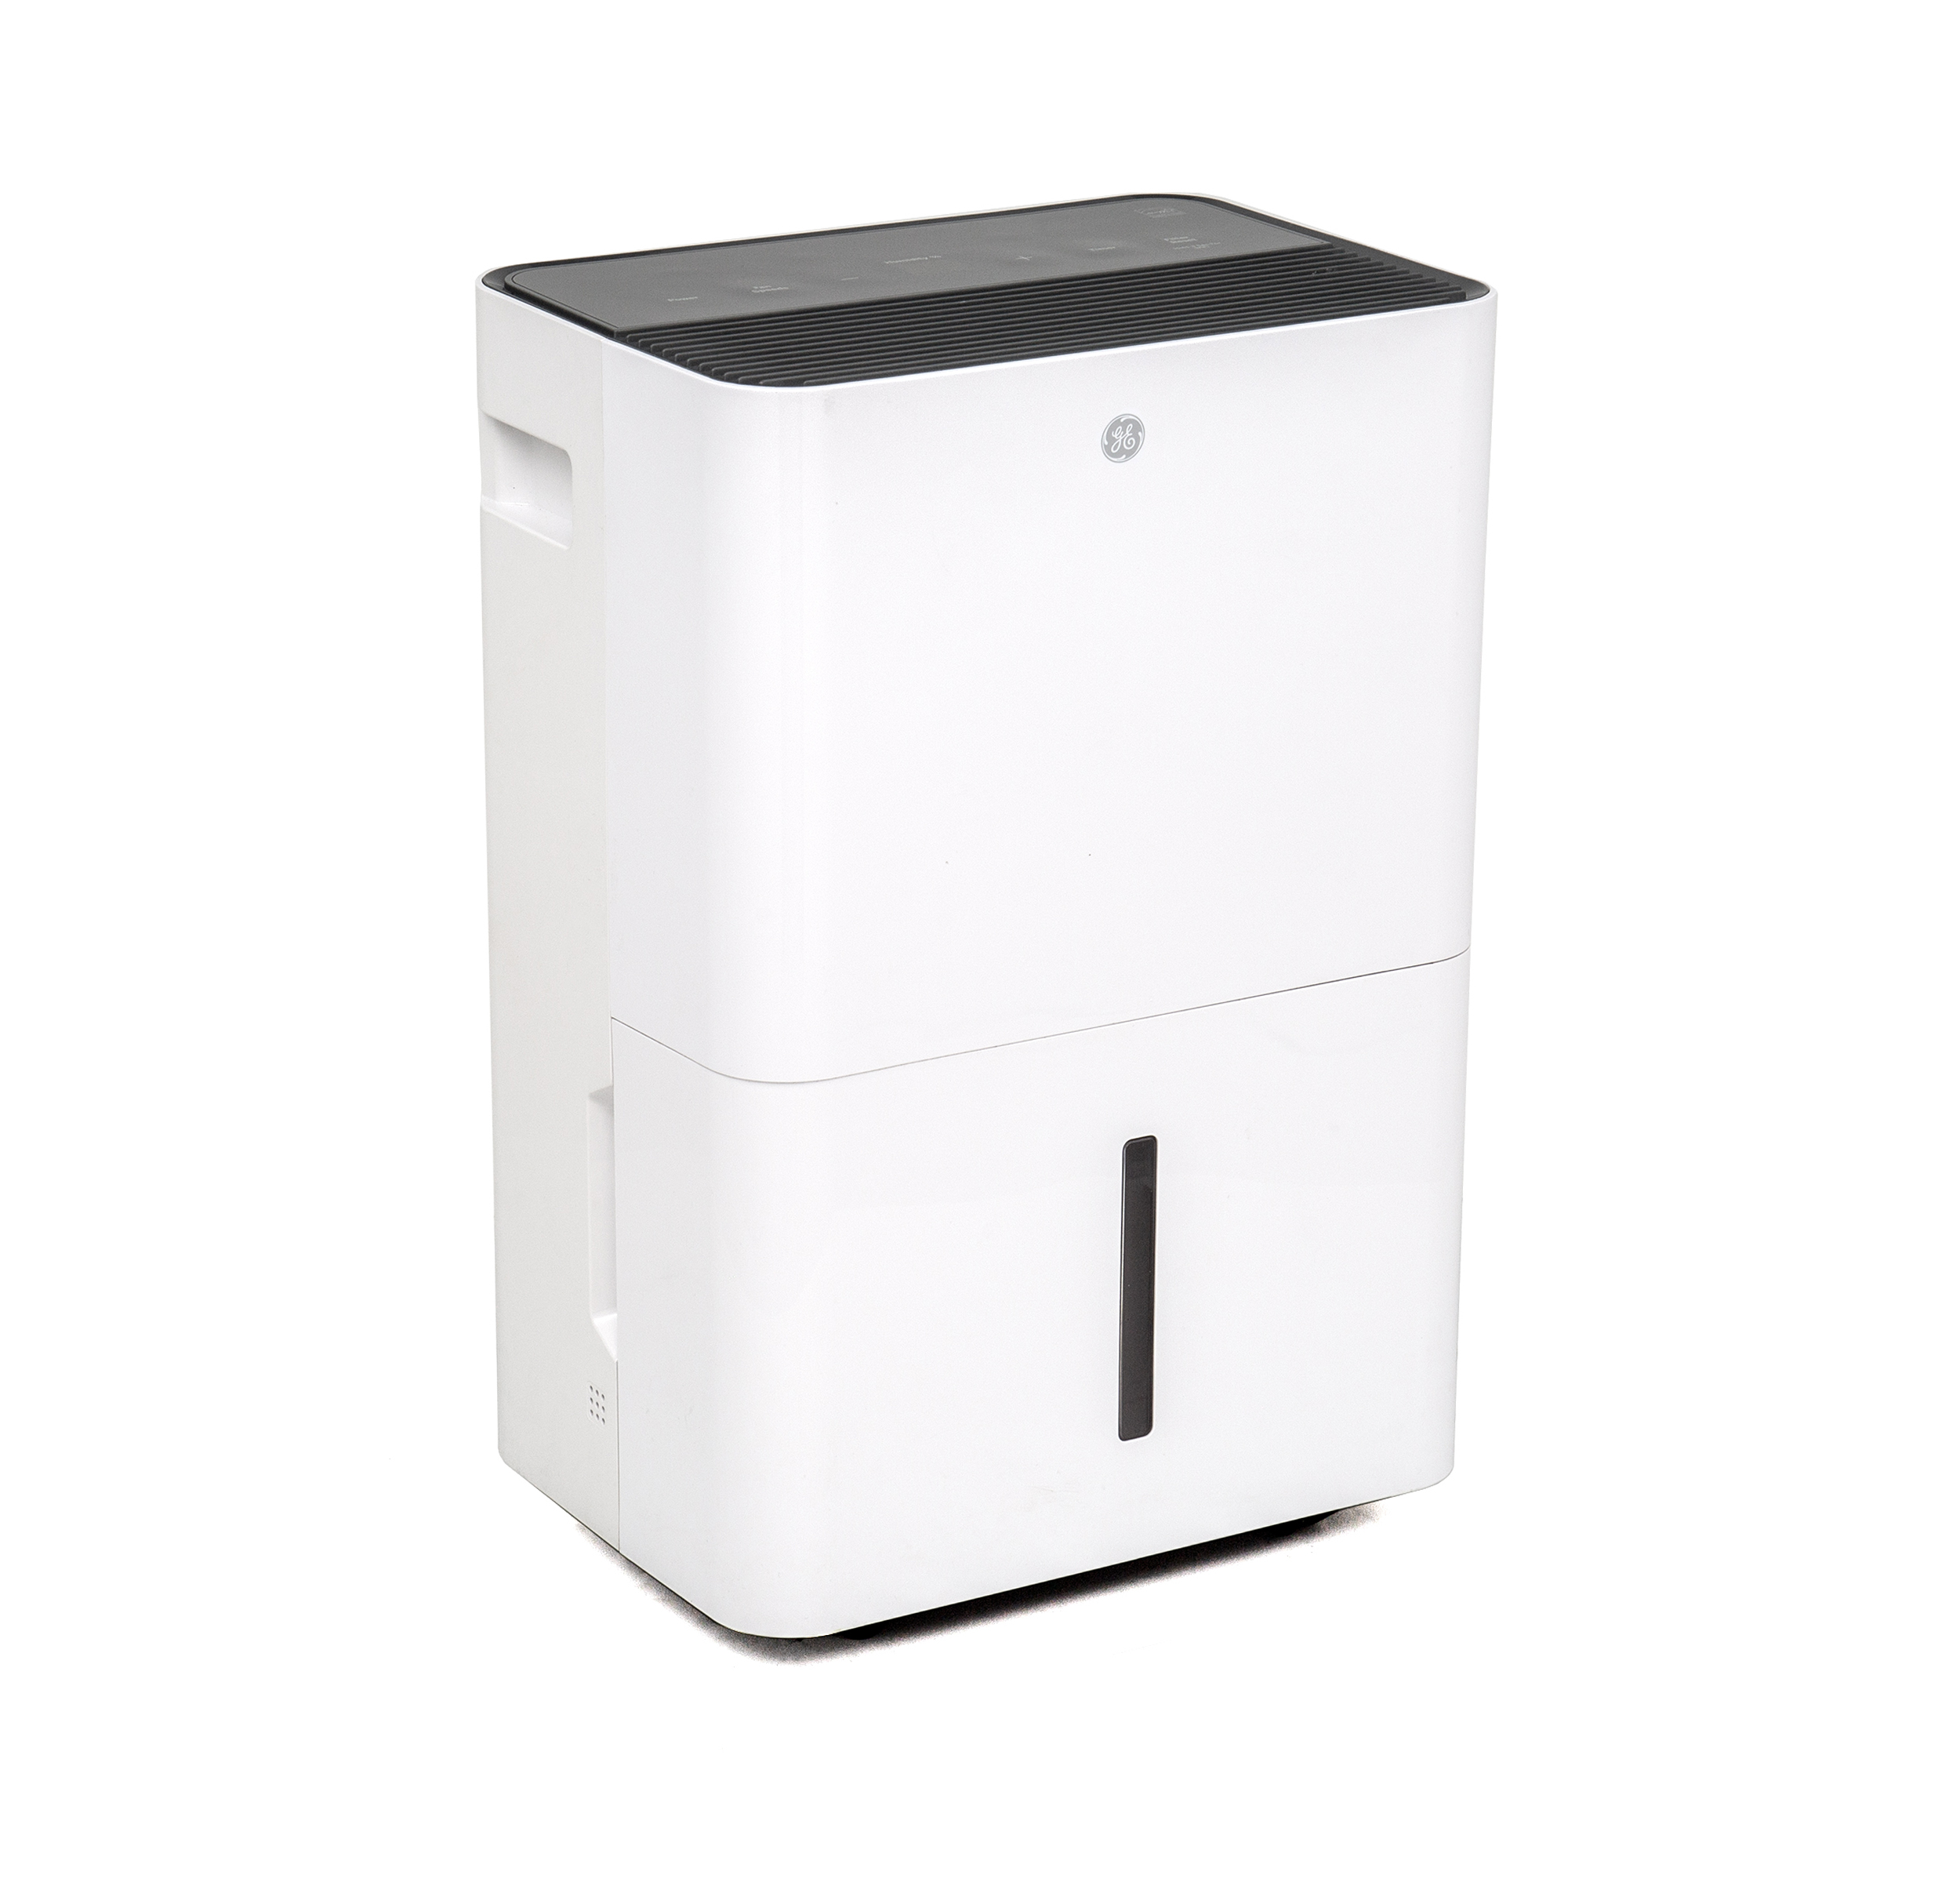 GE® ENERGY STAR® 22 Pint Portable Dehumidifier with Smart Dry for Damp Spaces